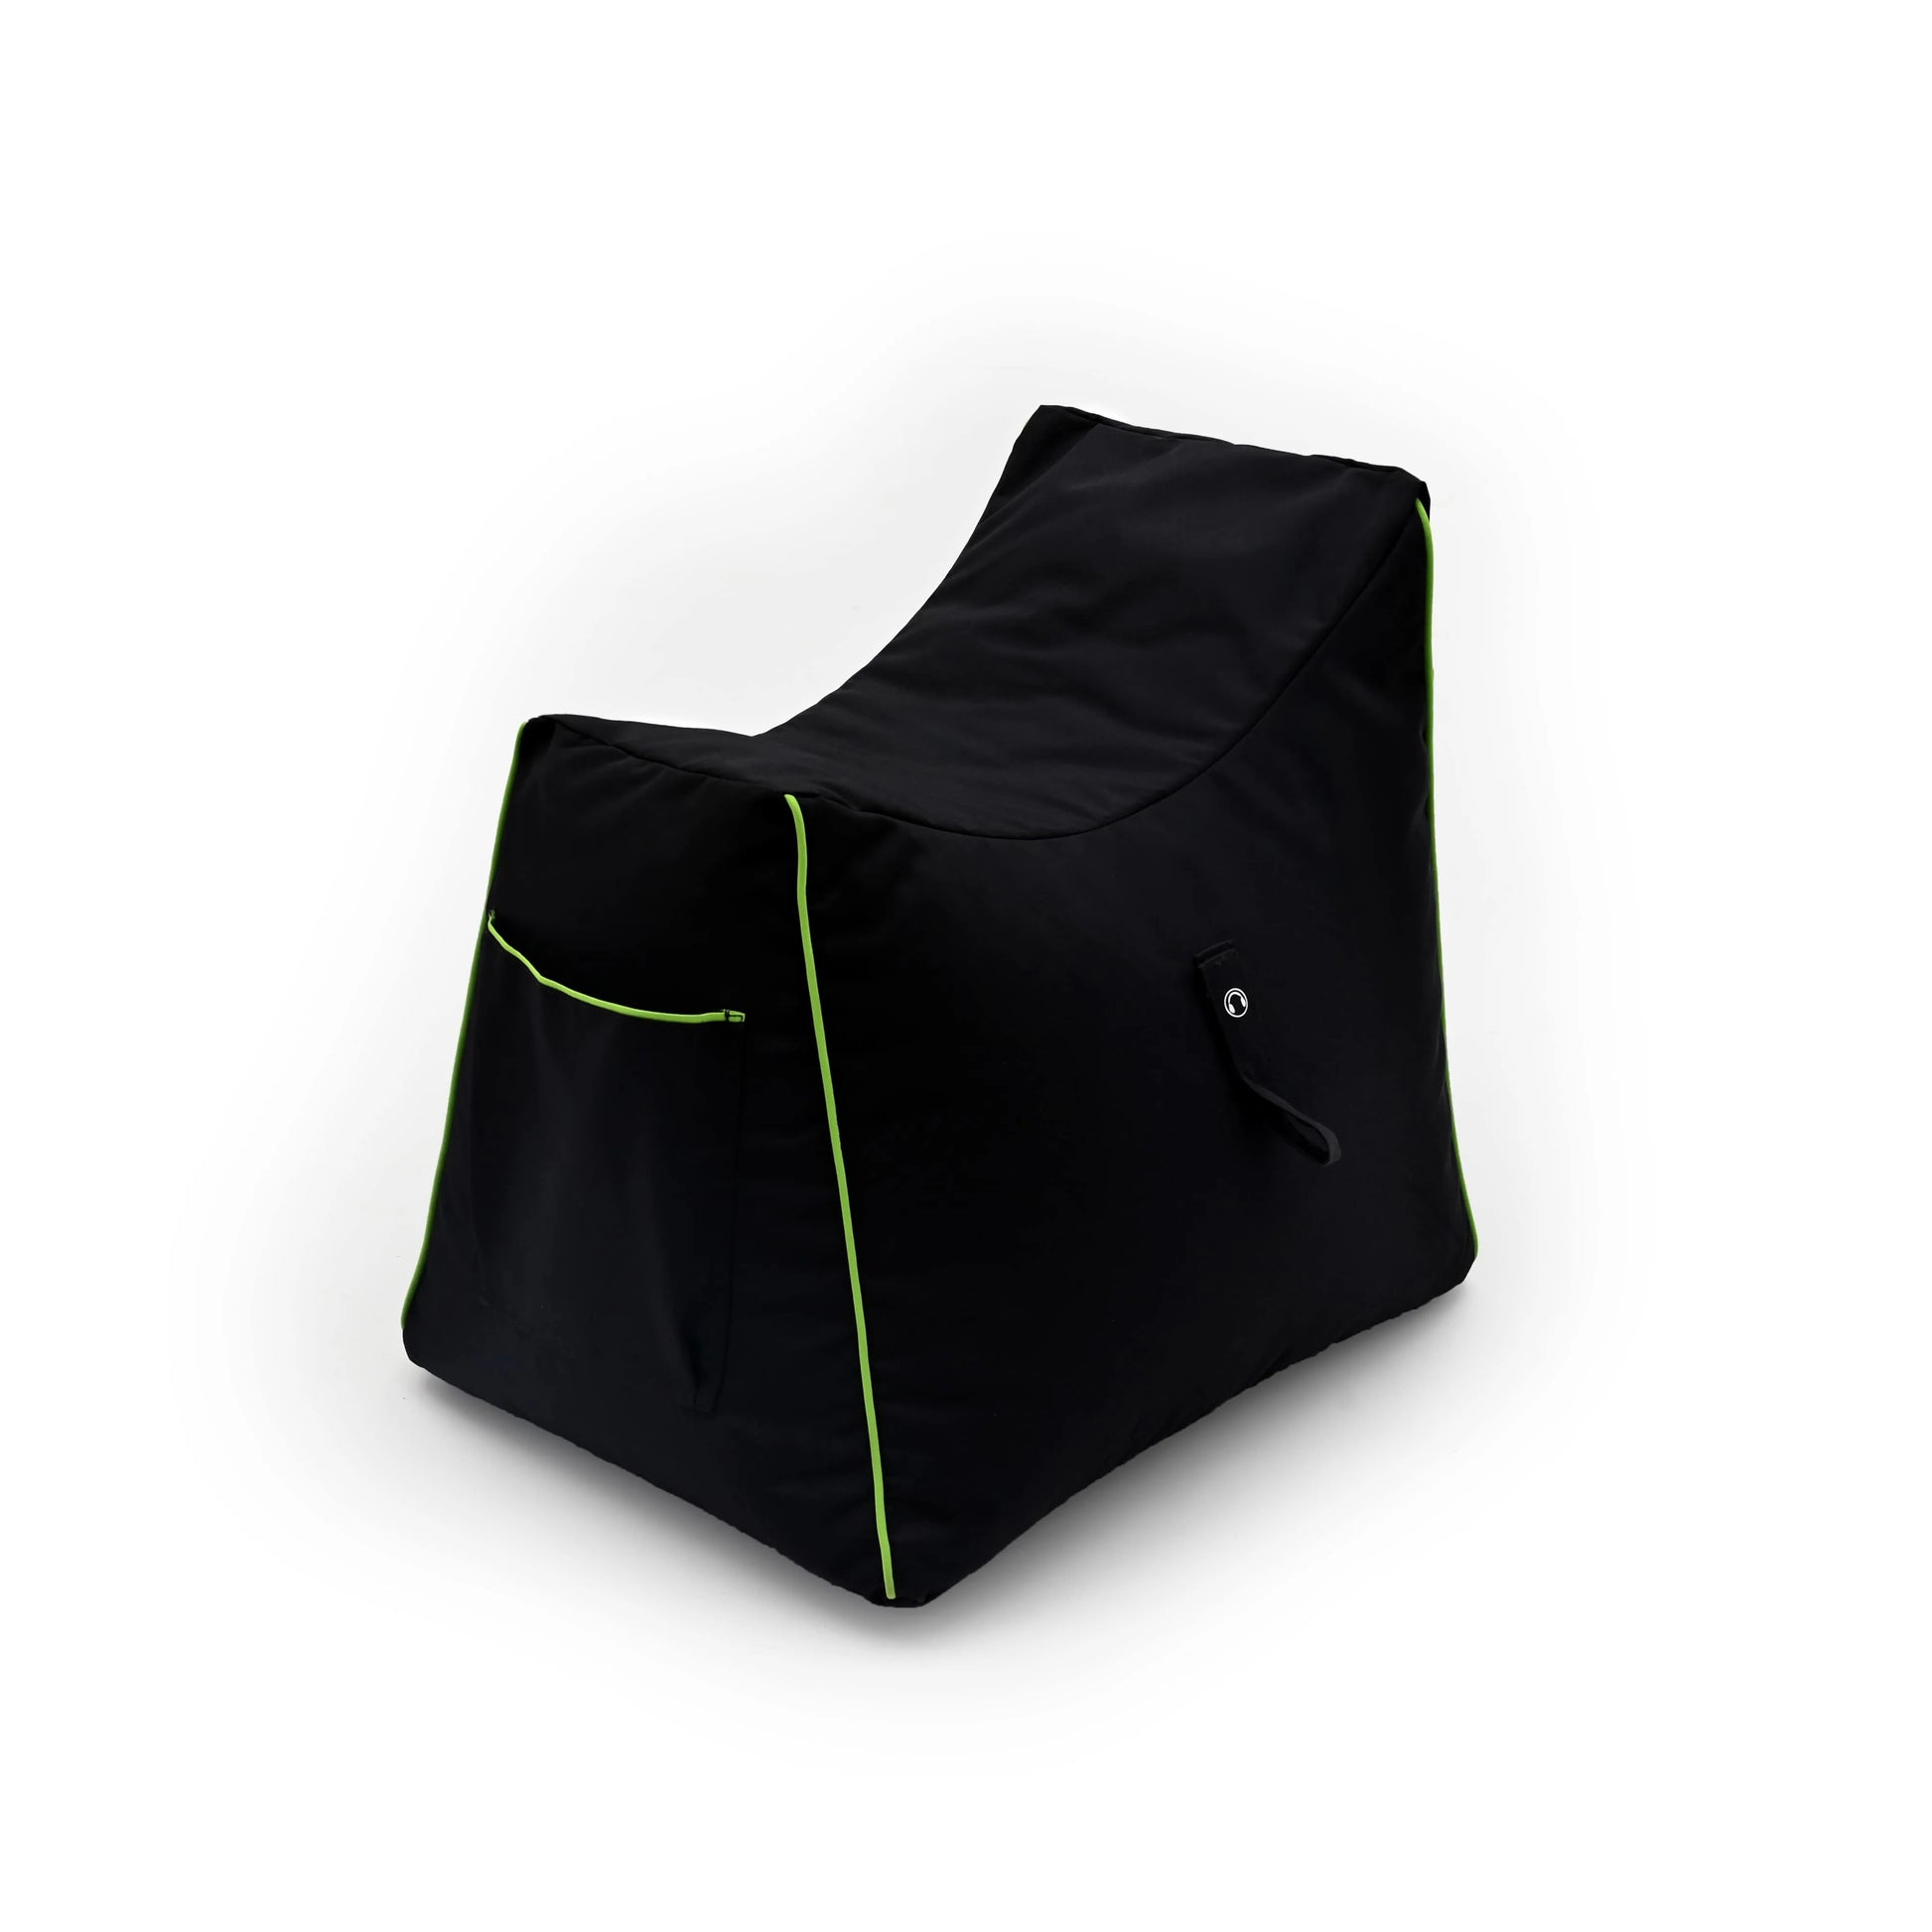 A black beanbag cover with green trim on a white background.